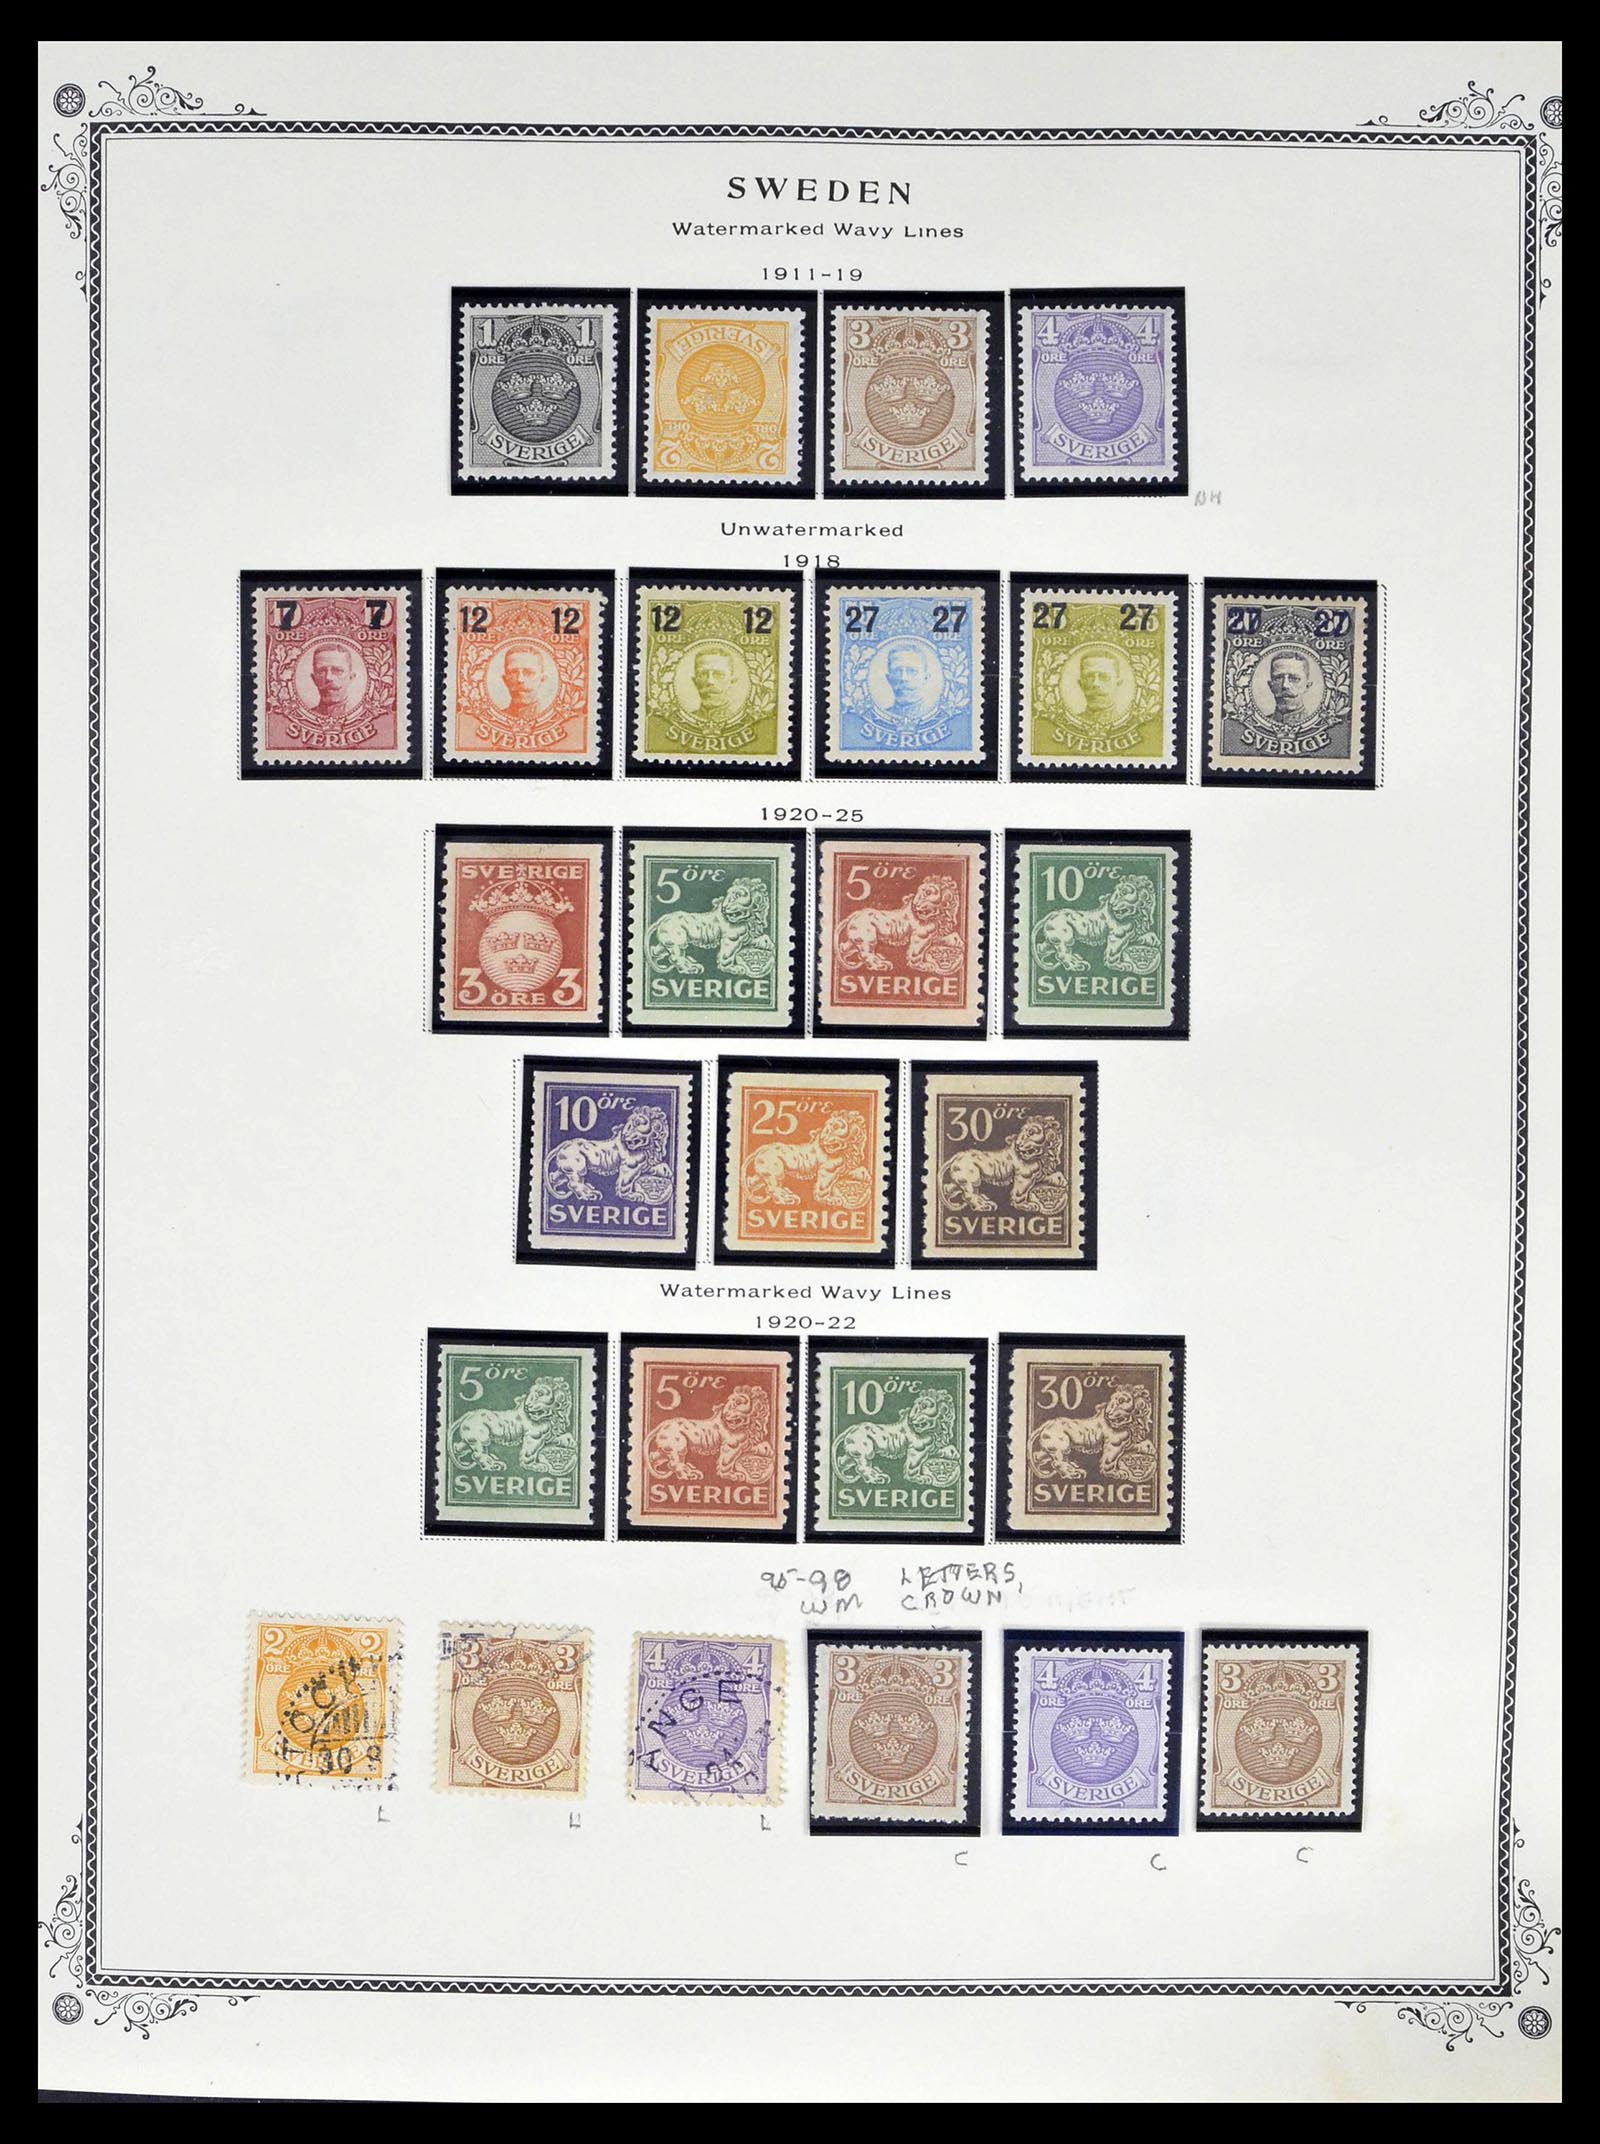 39179 0008 - Stamp collection 39179 Sweden 1855-1997.